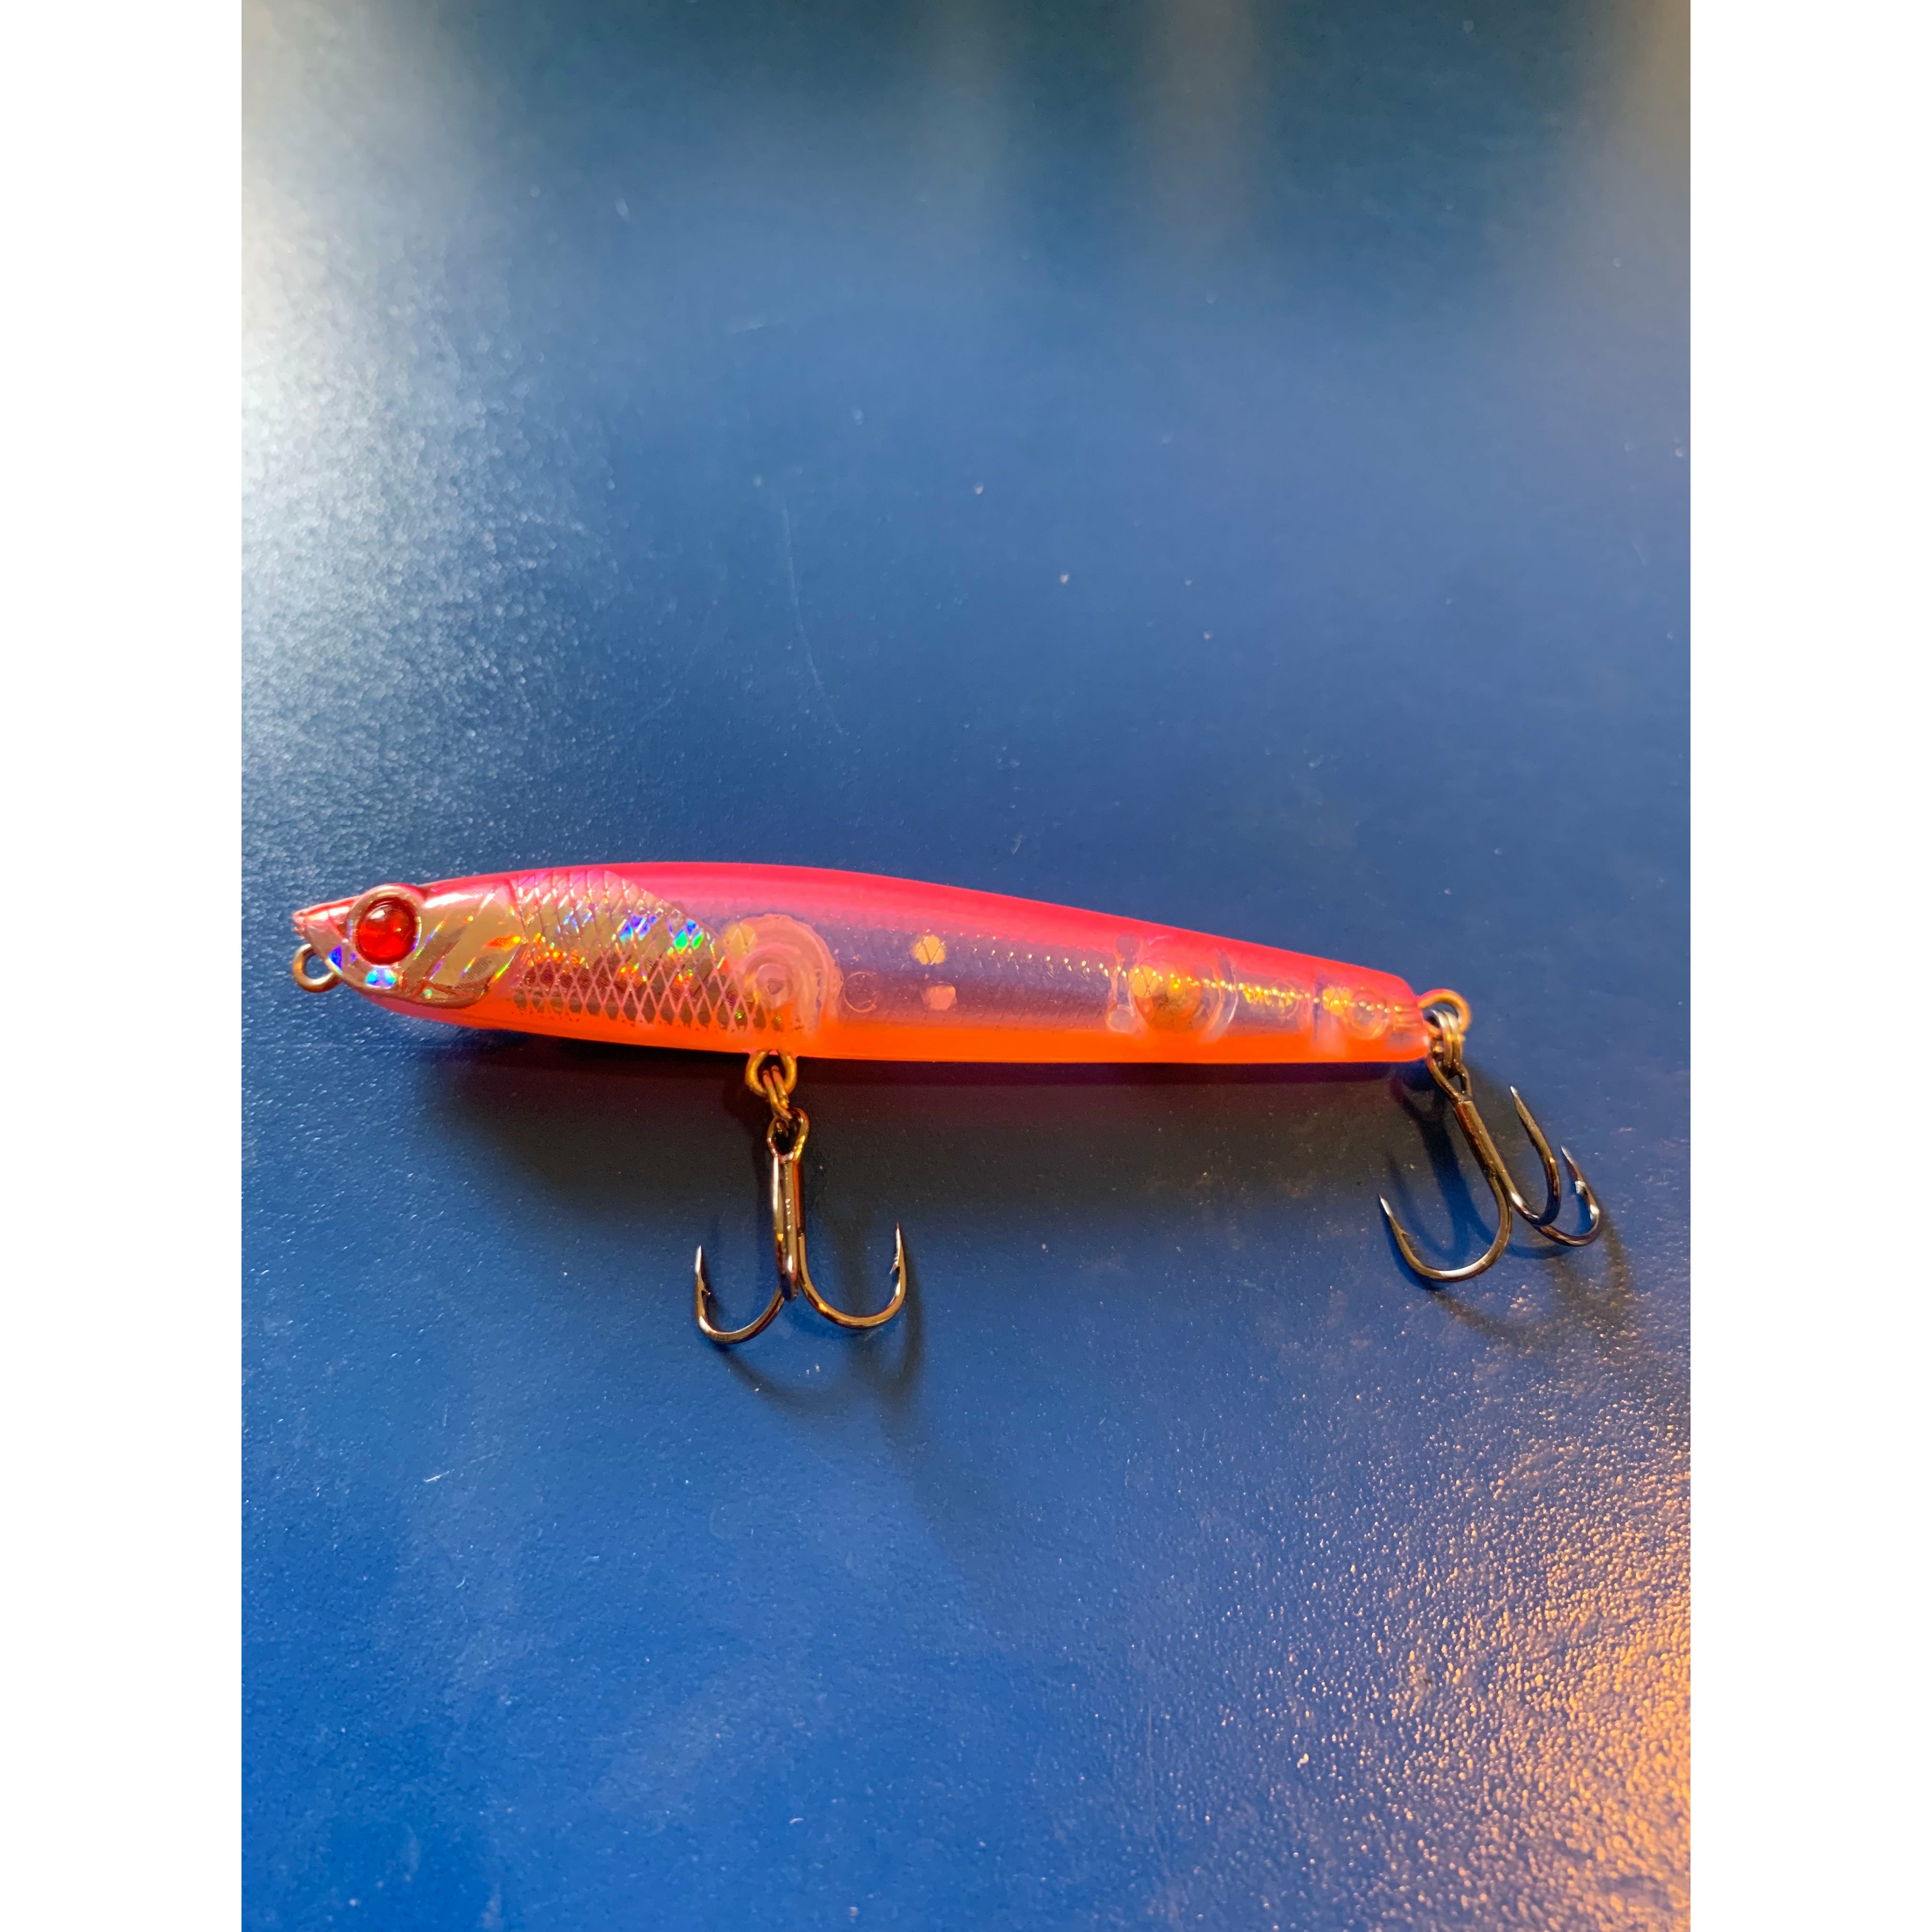 Fishing Lure Top water chase bait 55mm 3g